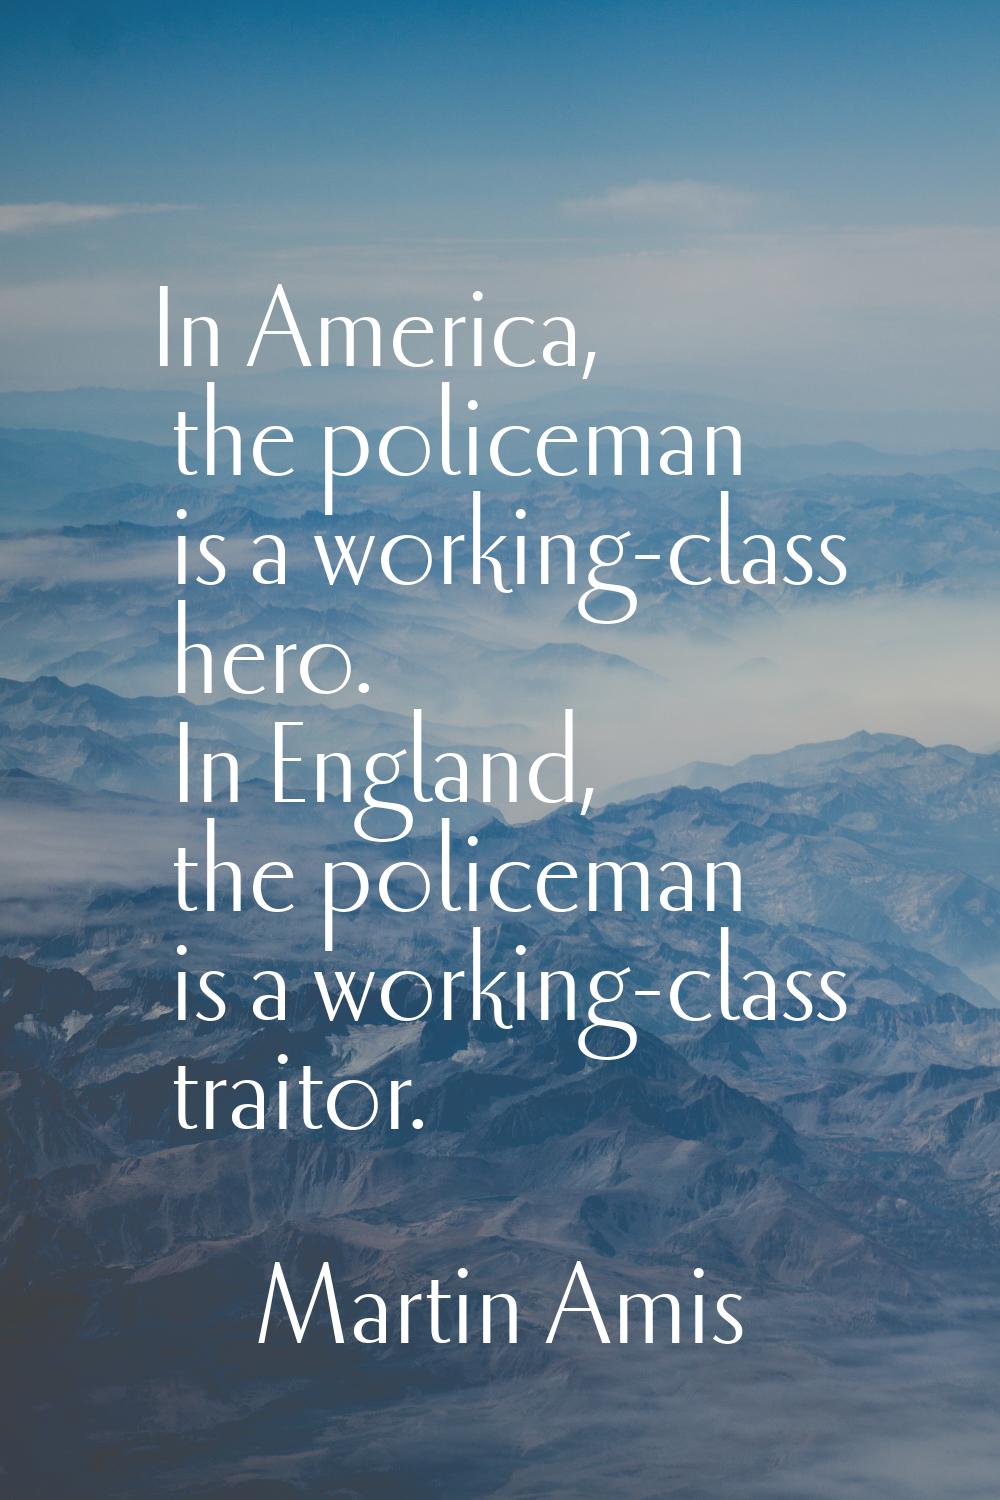 In America, the policeman is a working-class hero. In England, the policeman is a working-class tra